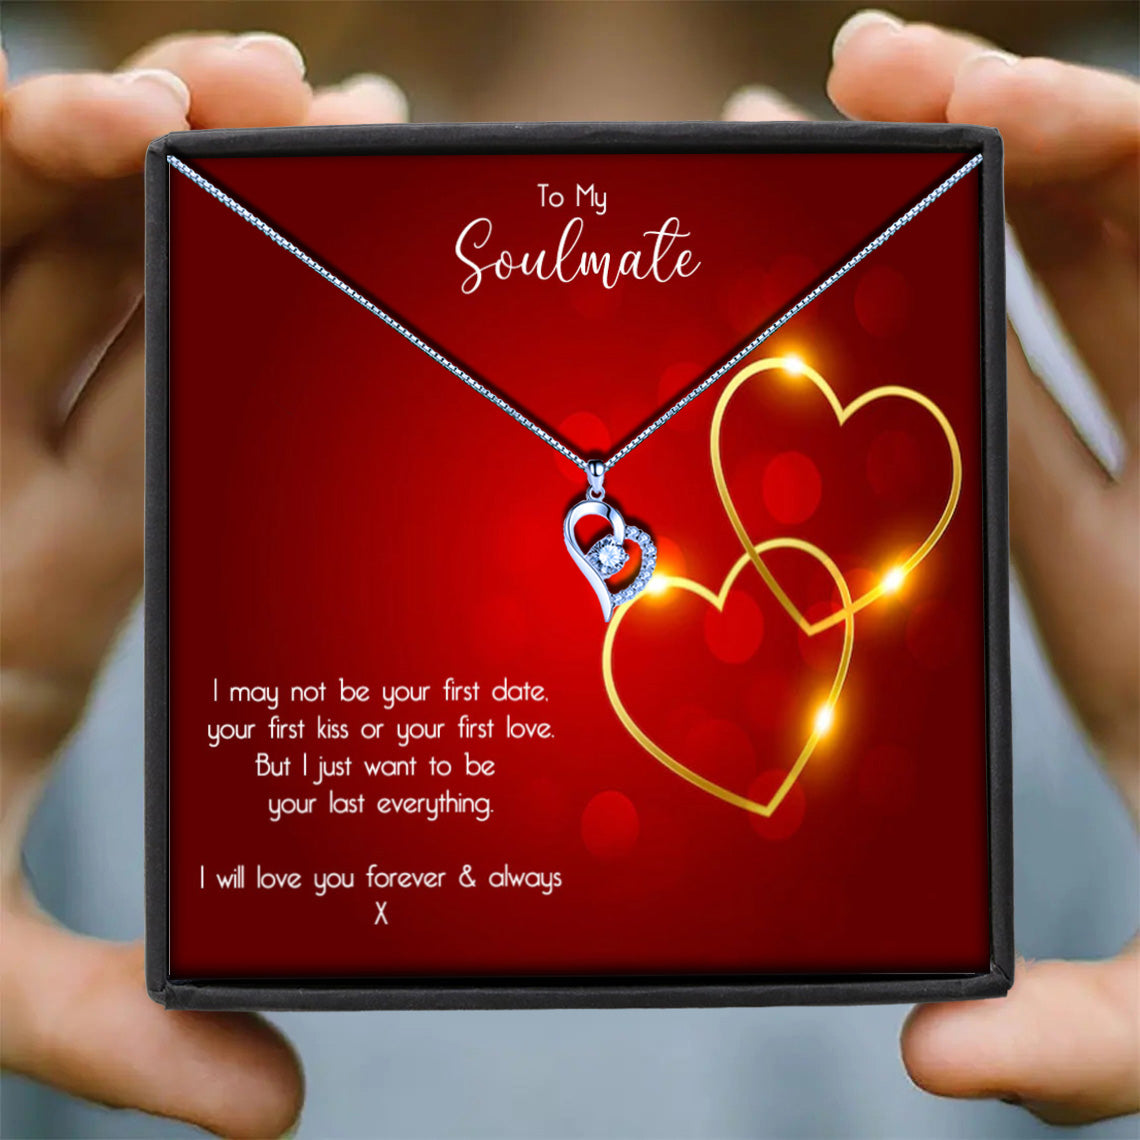 To My Soulmate - Romantic Red Gold Heart Message Necklace